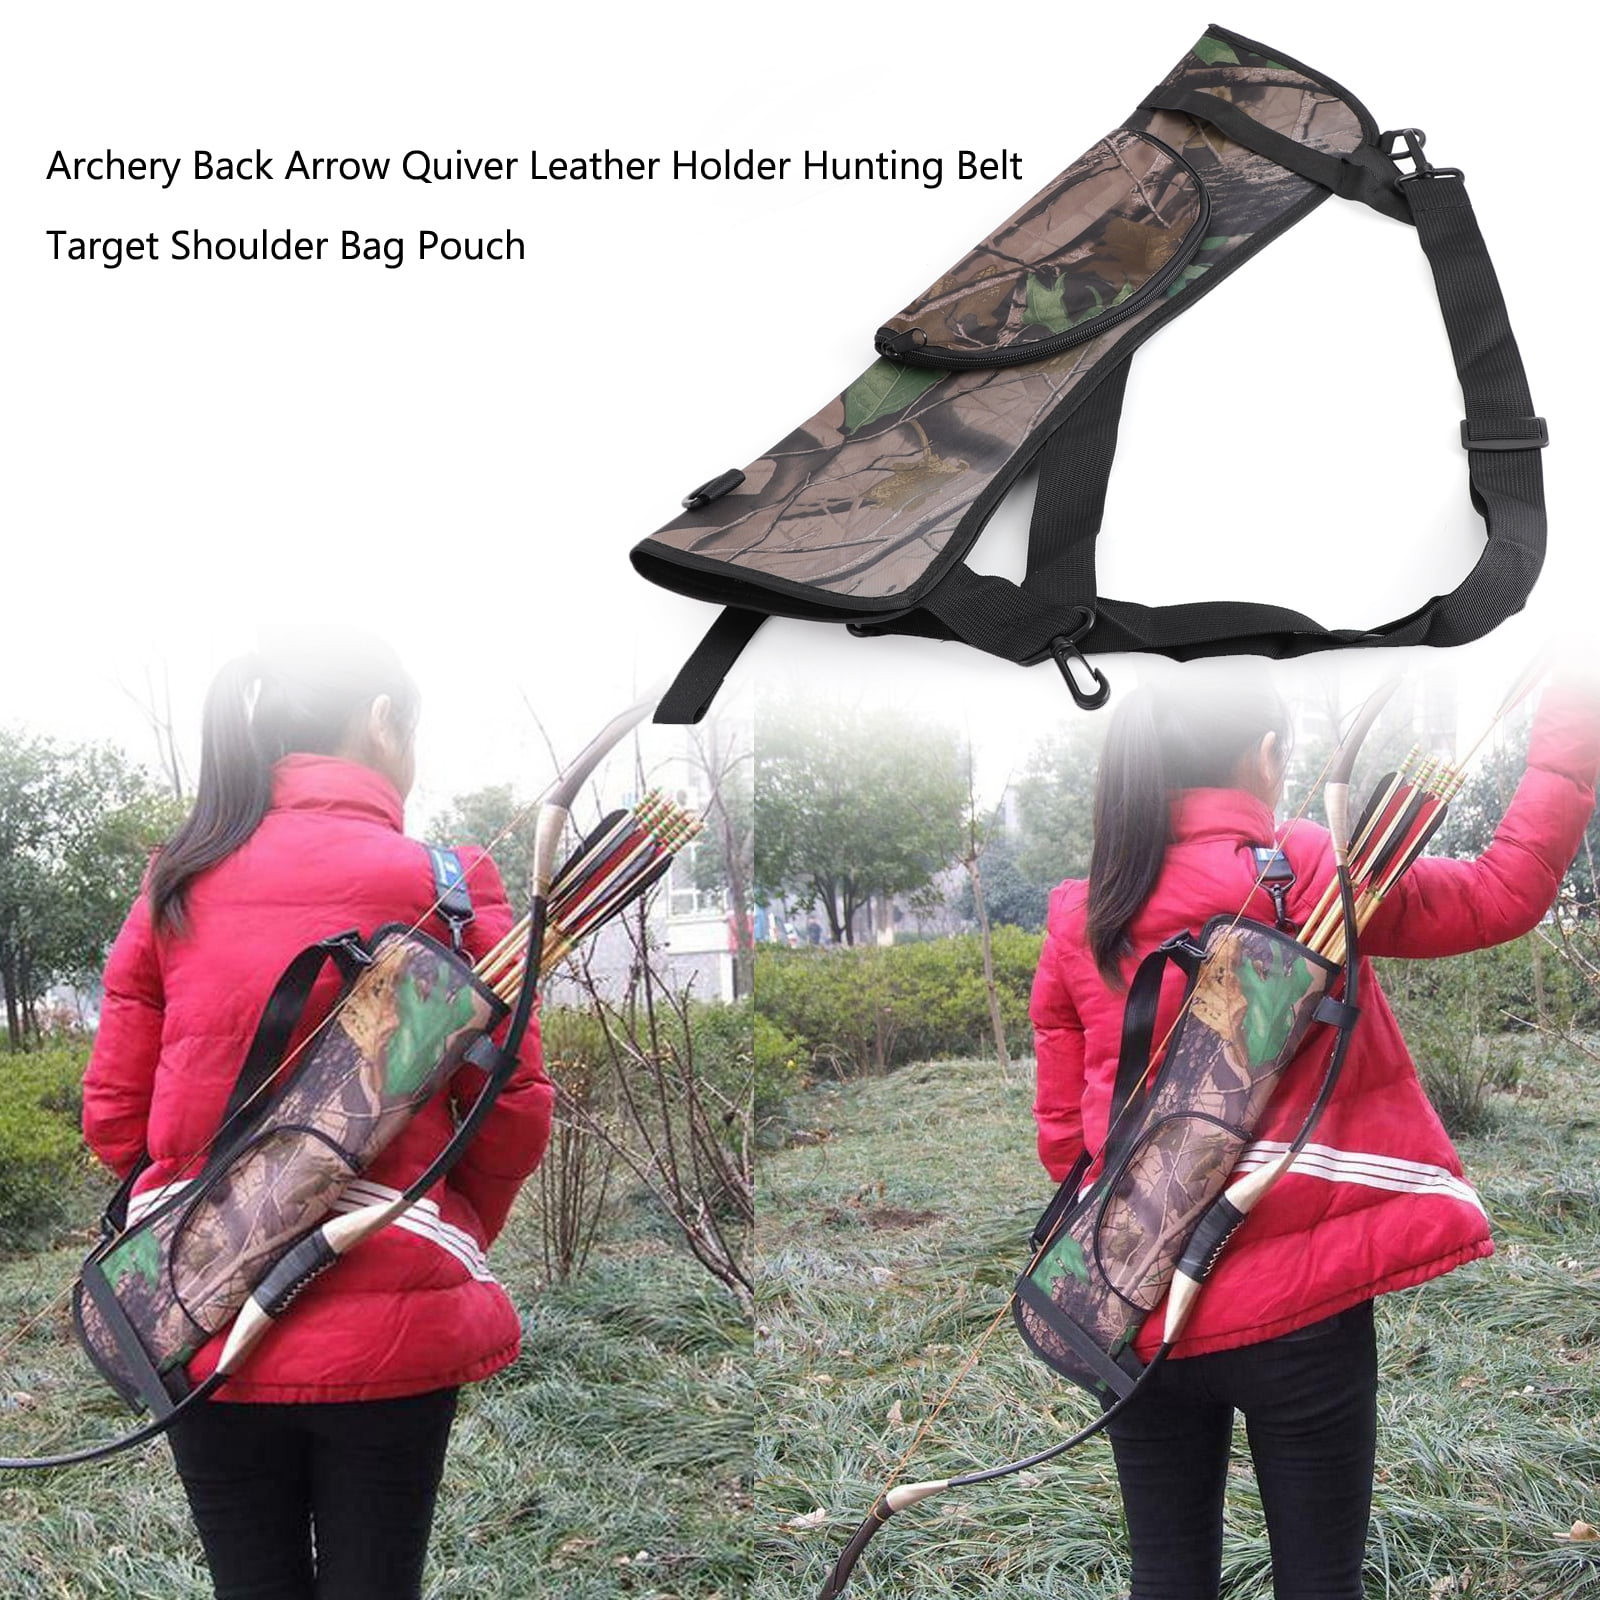 Leather Arrow Wasit Quiver 6 Arrows Carry Bag for Archery Hunting Black 